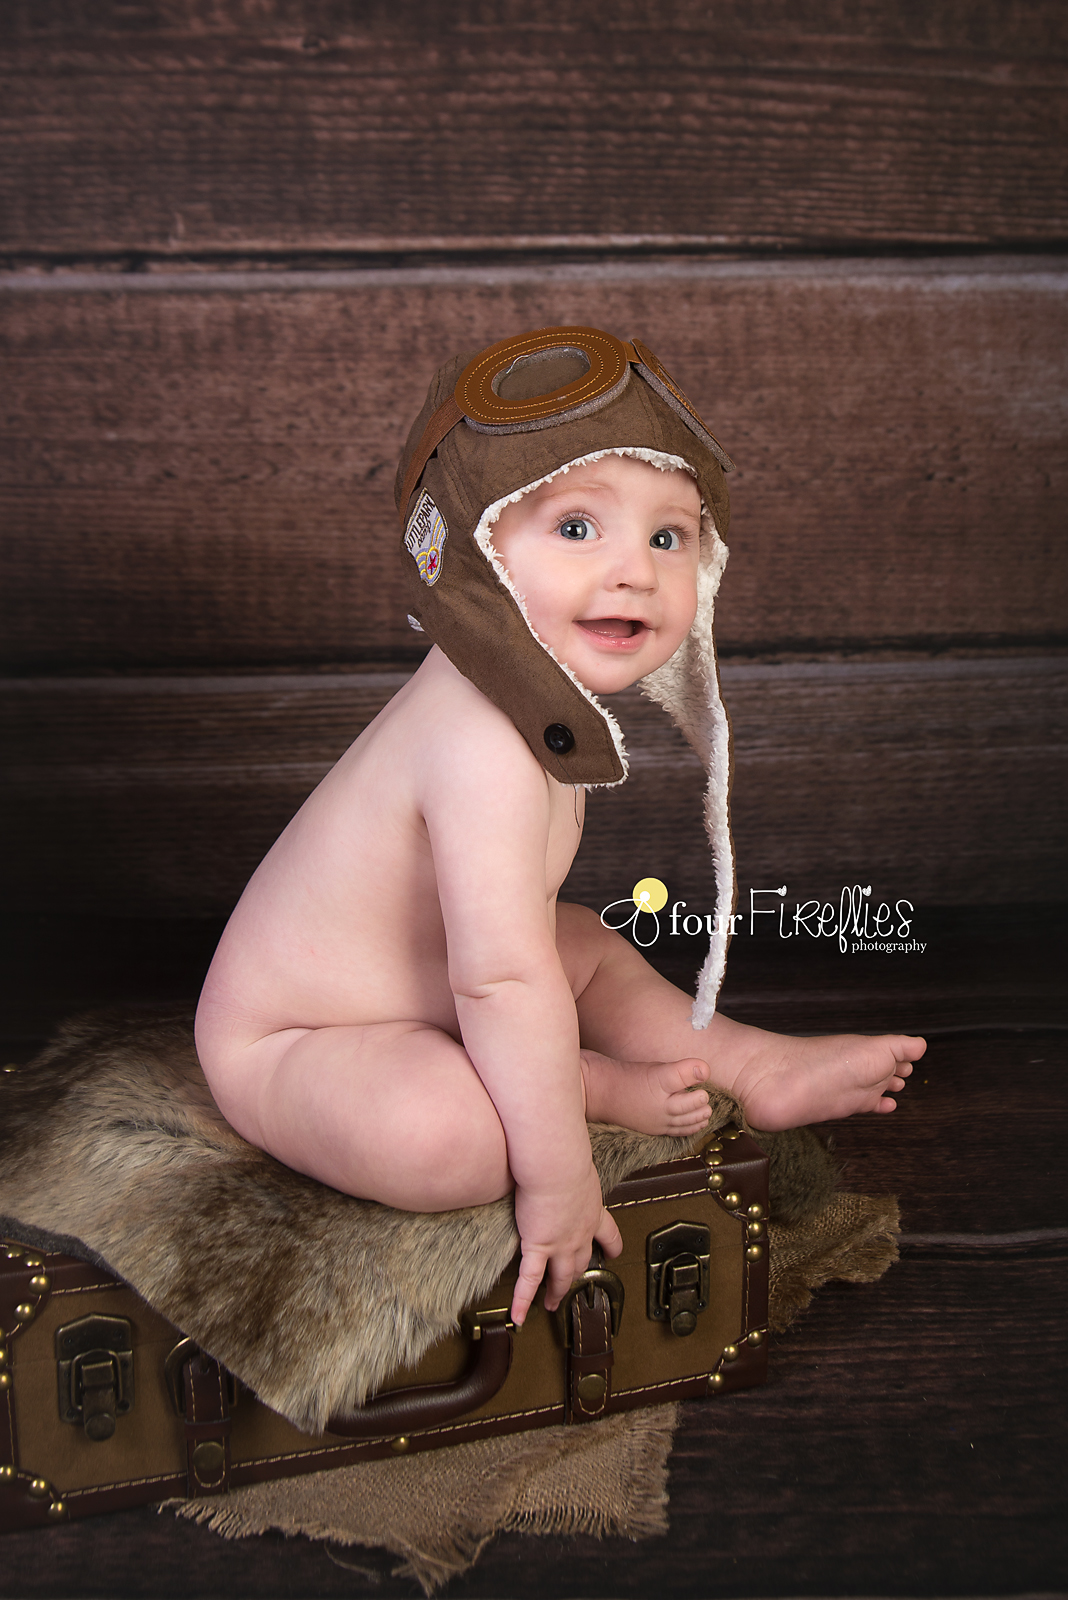 st-louis-photography-studio-6-month-milestone-session-boy-bare-bum-on-suitcase-with-avaitor-hat-and-wood-backdrop.jpg